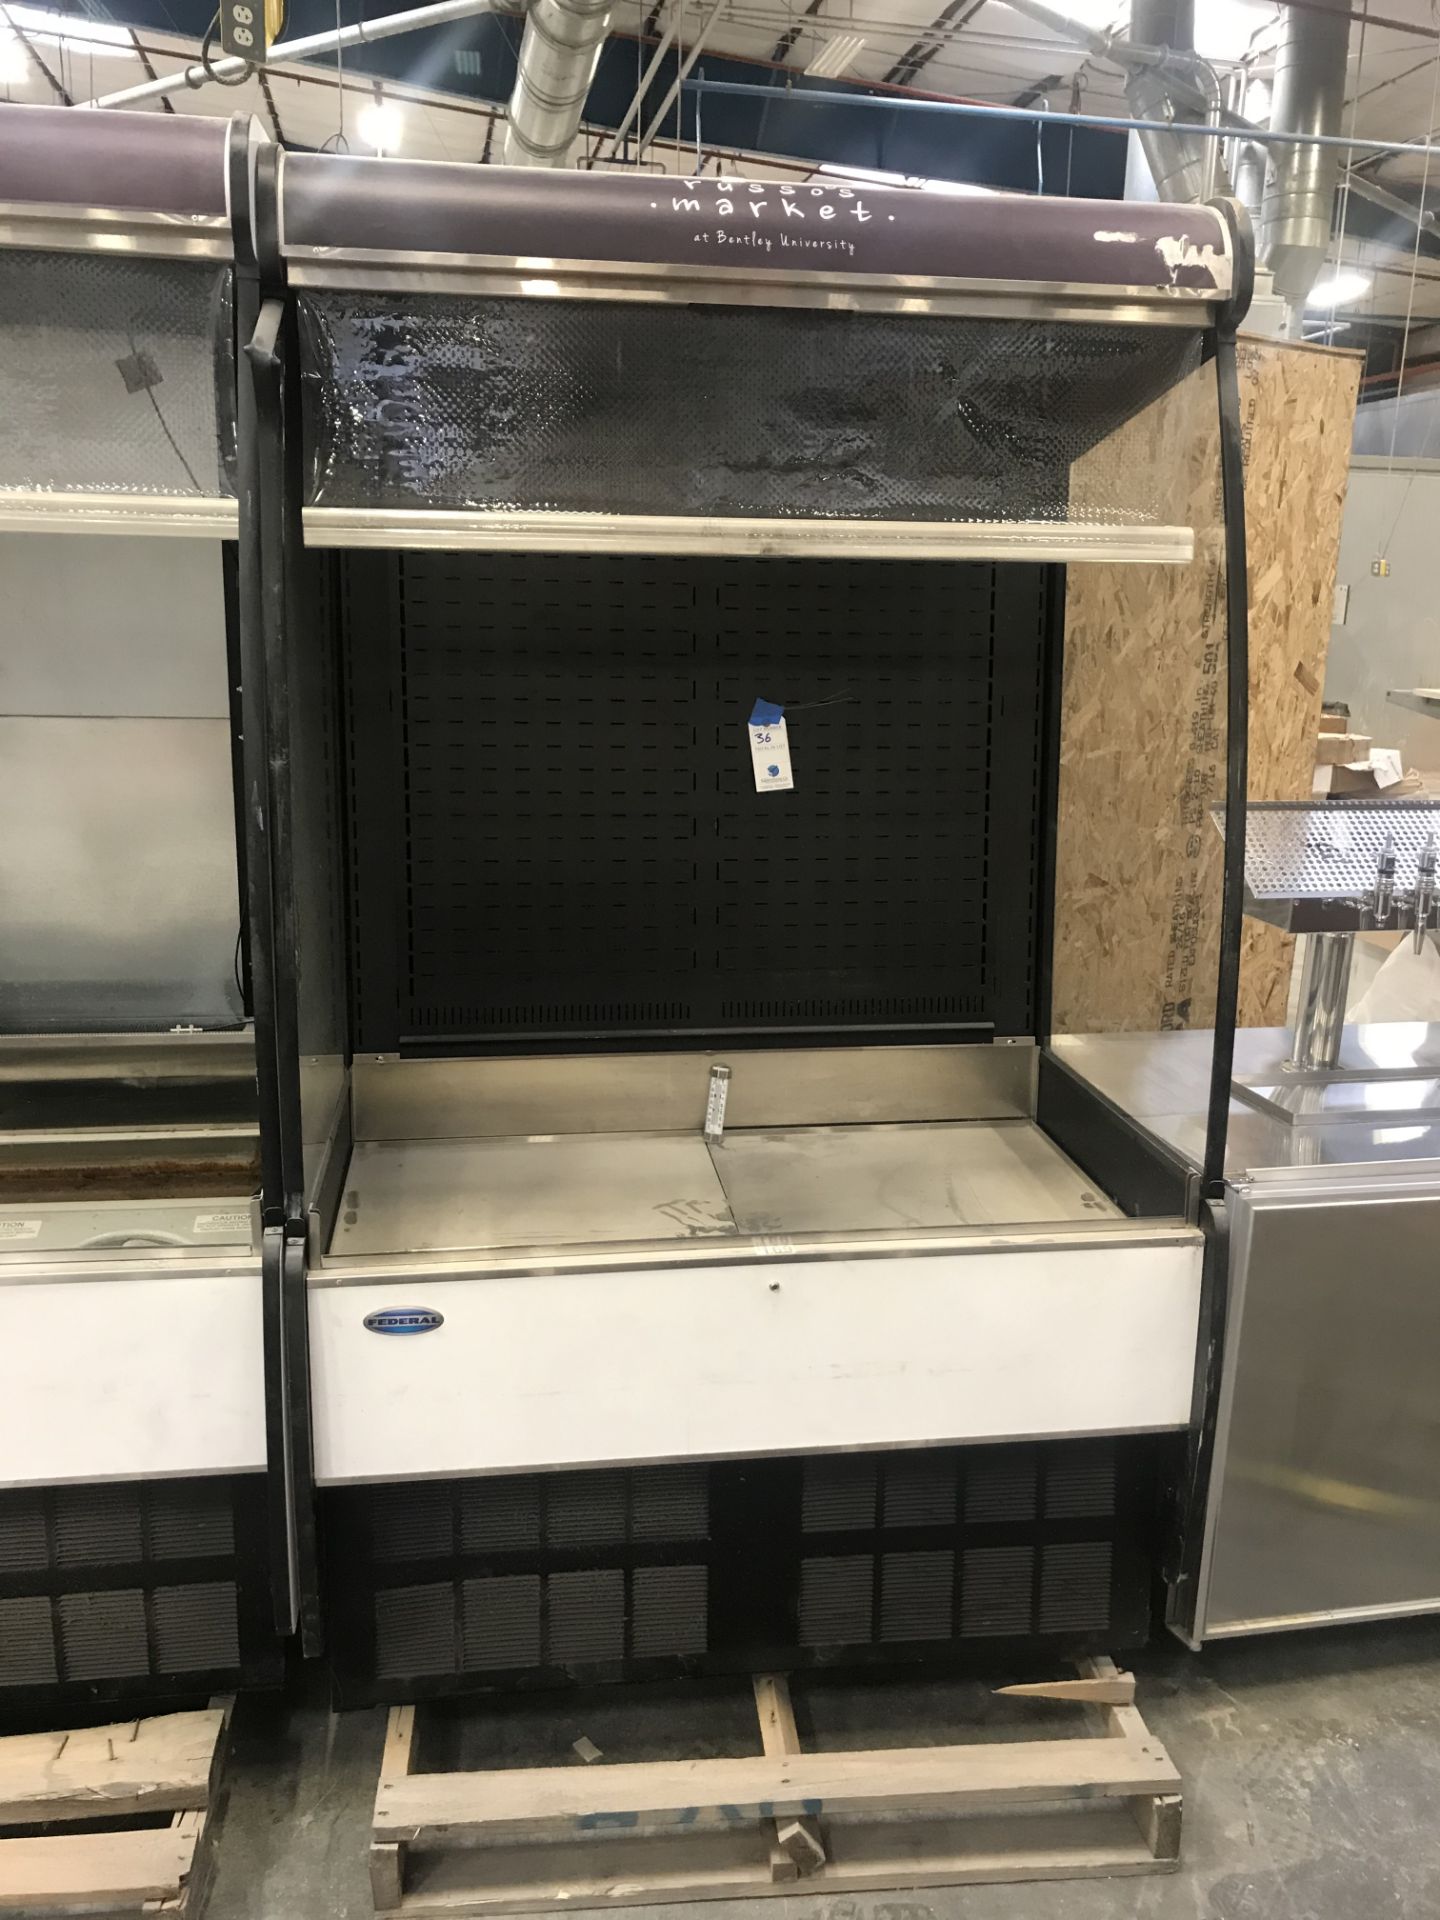 47"W x 79"H x 34"D Self Contained Federal Refrigerated Merchandiser #RSM478 with Drop Down Sneeze